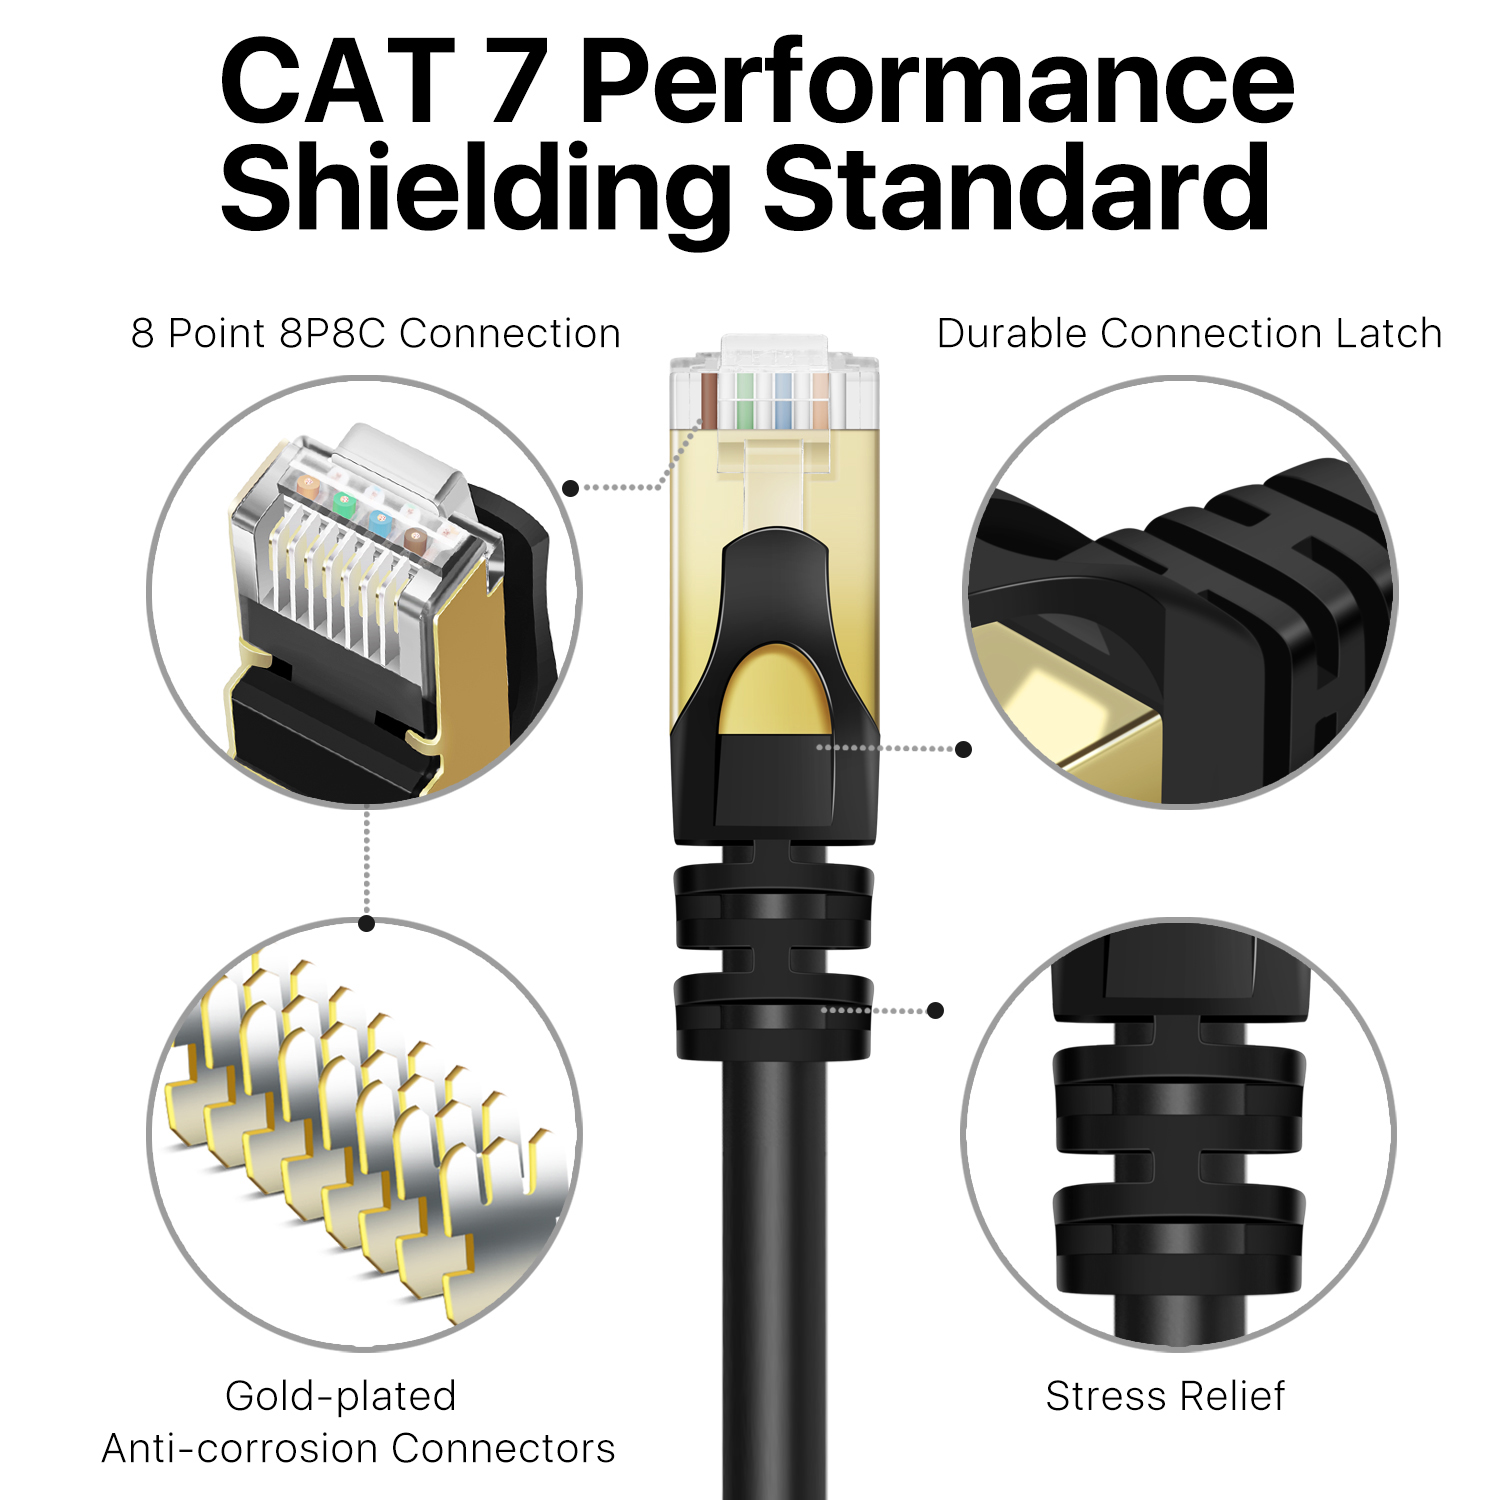 Premium & Quality materials - Solid 24 AWG copper filaments compose the patch cable cord's signal conductors. The twisted pairs are then separated by PE insulation molding that prevents internet cable signal interference. The cable's also gold-plated and made with a molded strain relief